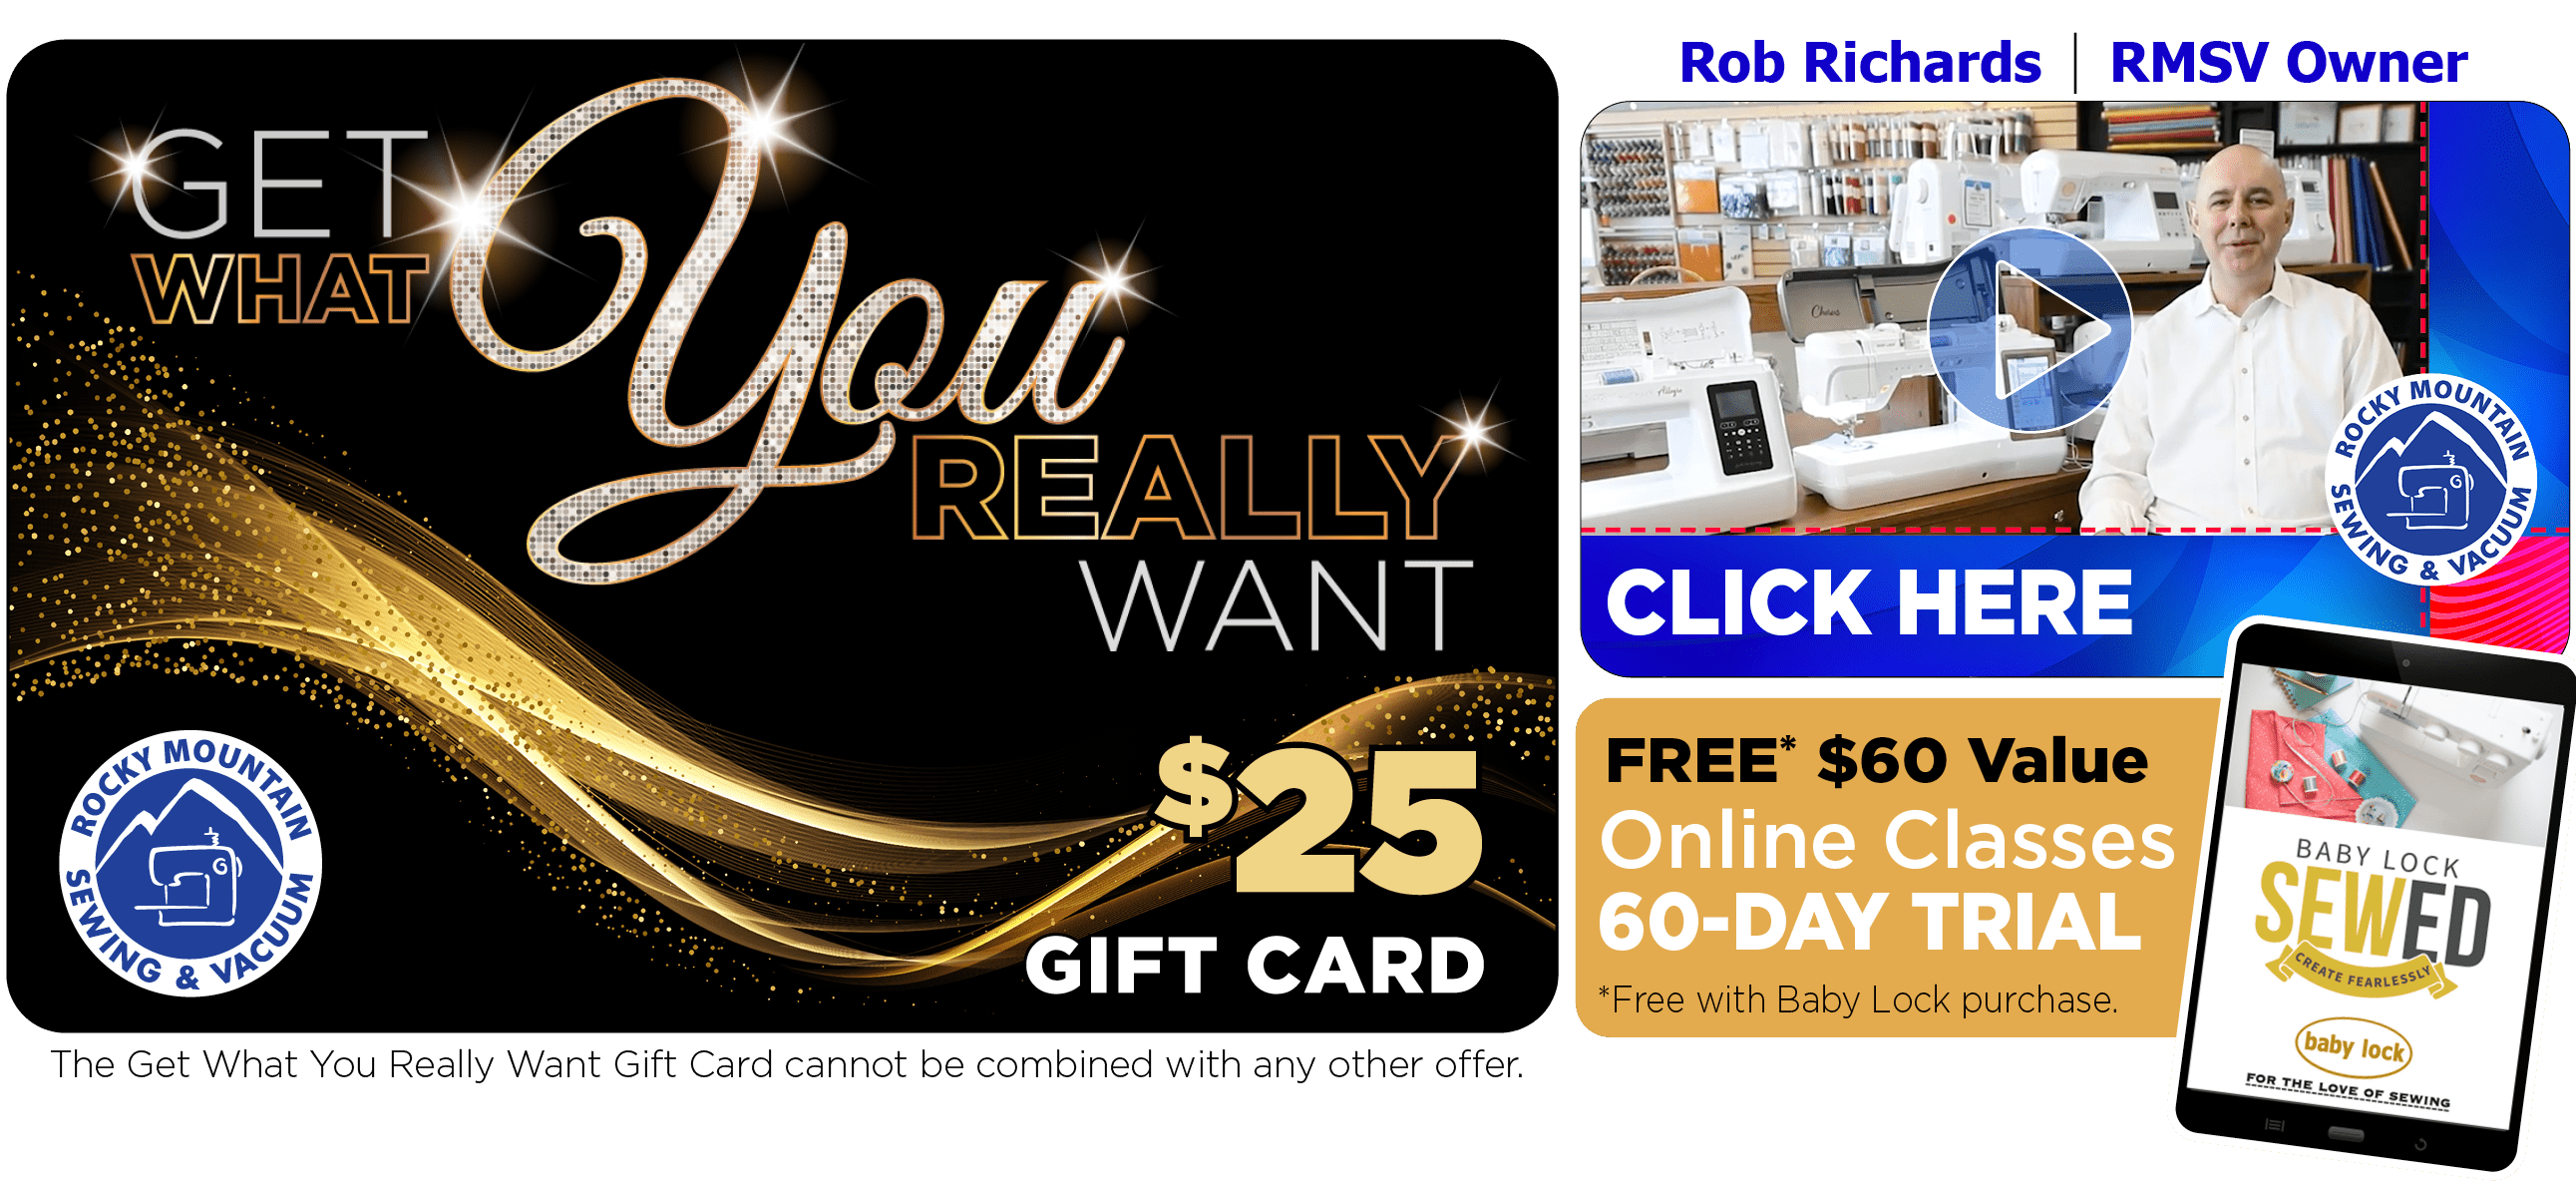 Get What You Really Want $25 Gift Card with Purchase